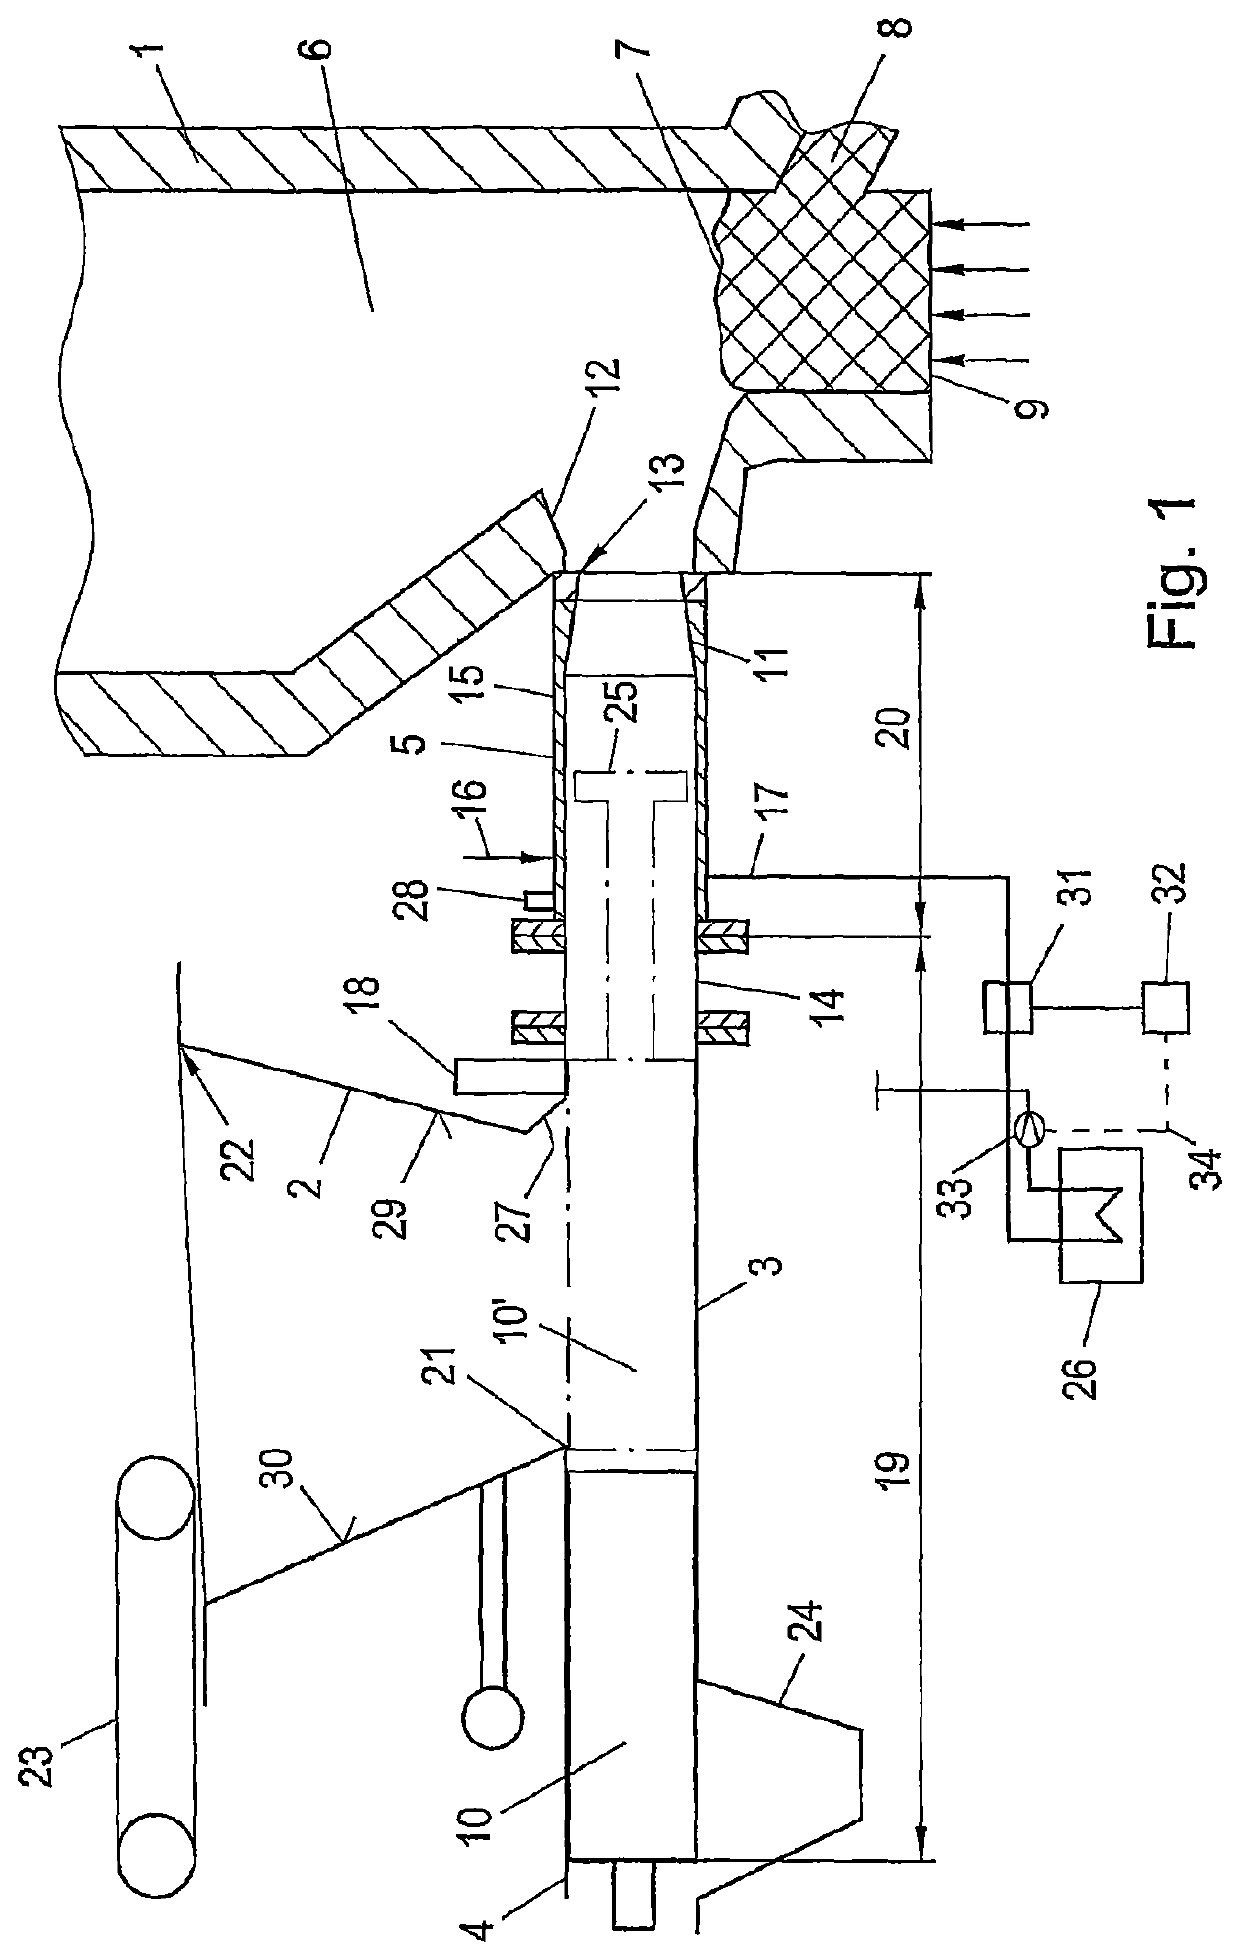 Device for conveying fuels into a gasification reactor